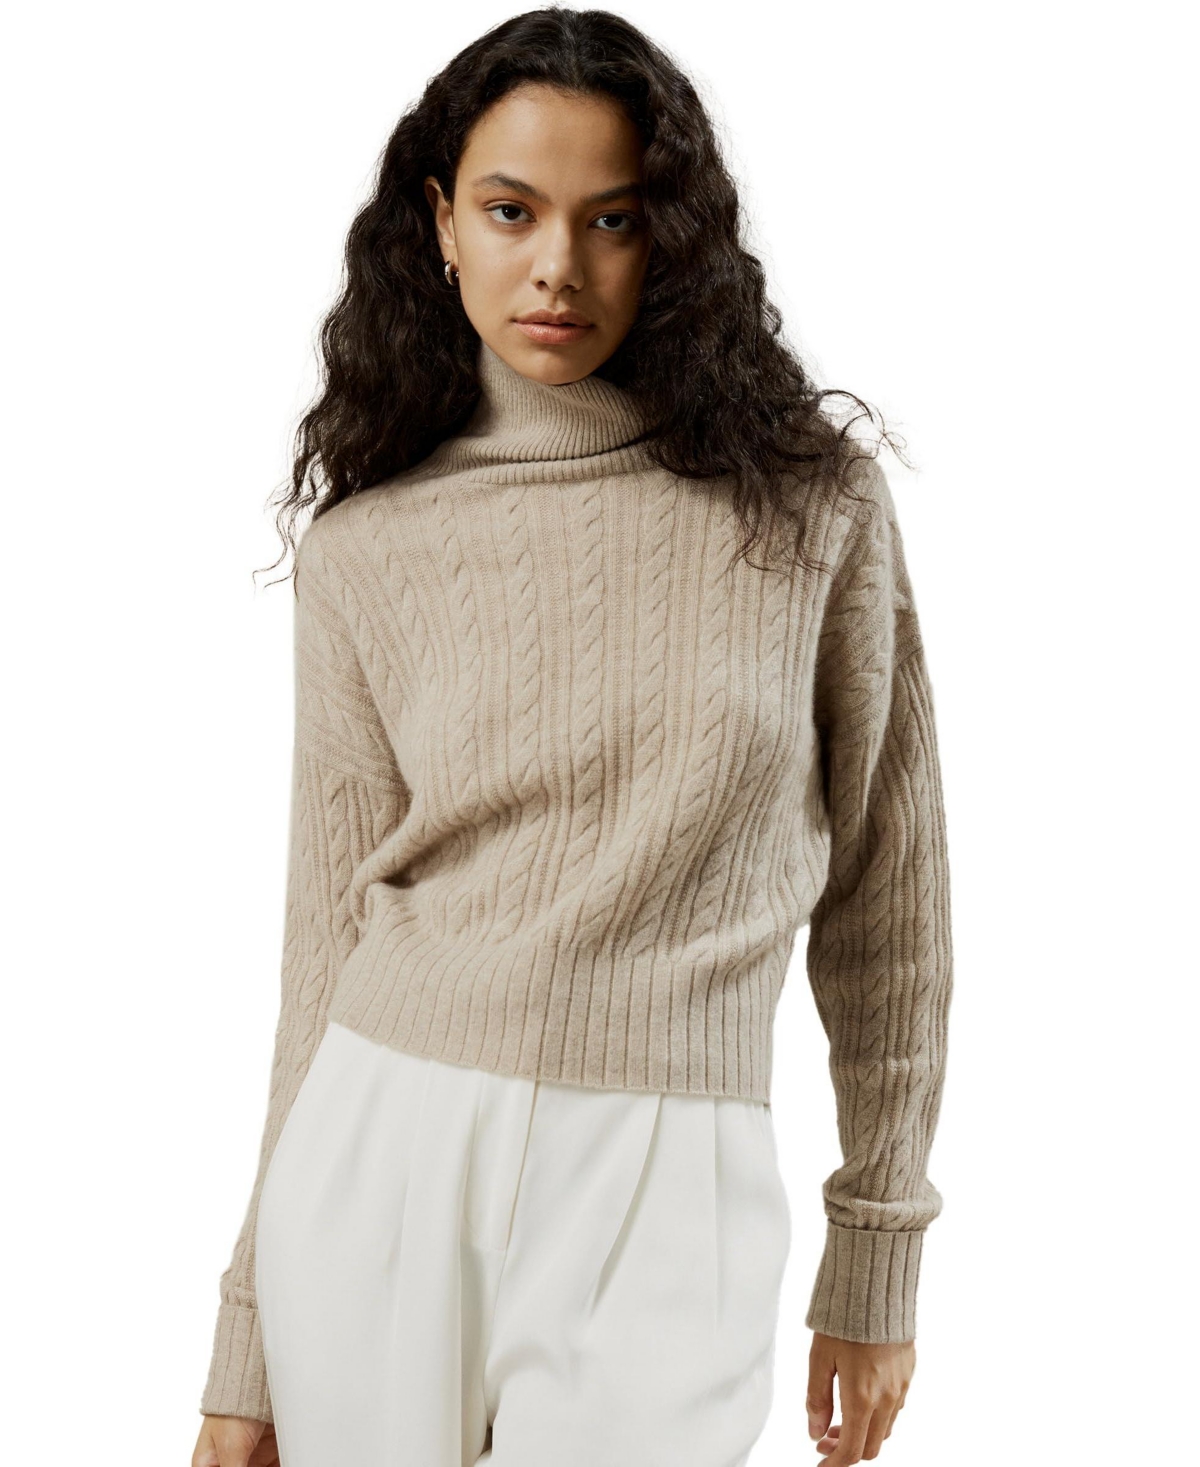 Women's Classic Cable Knit Turtleneck Sweater - Beige